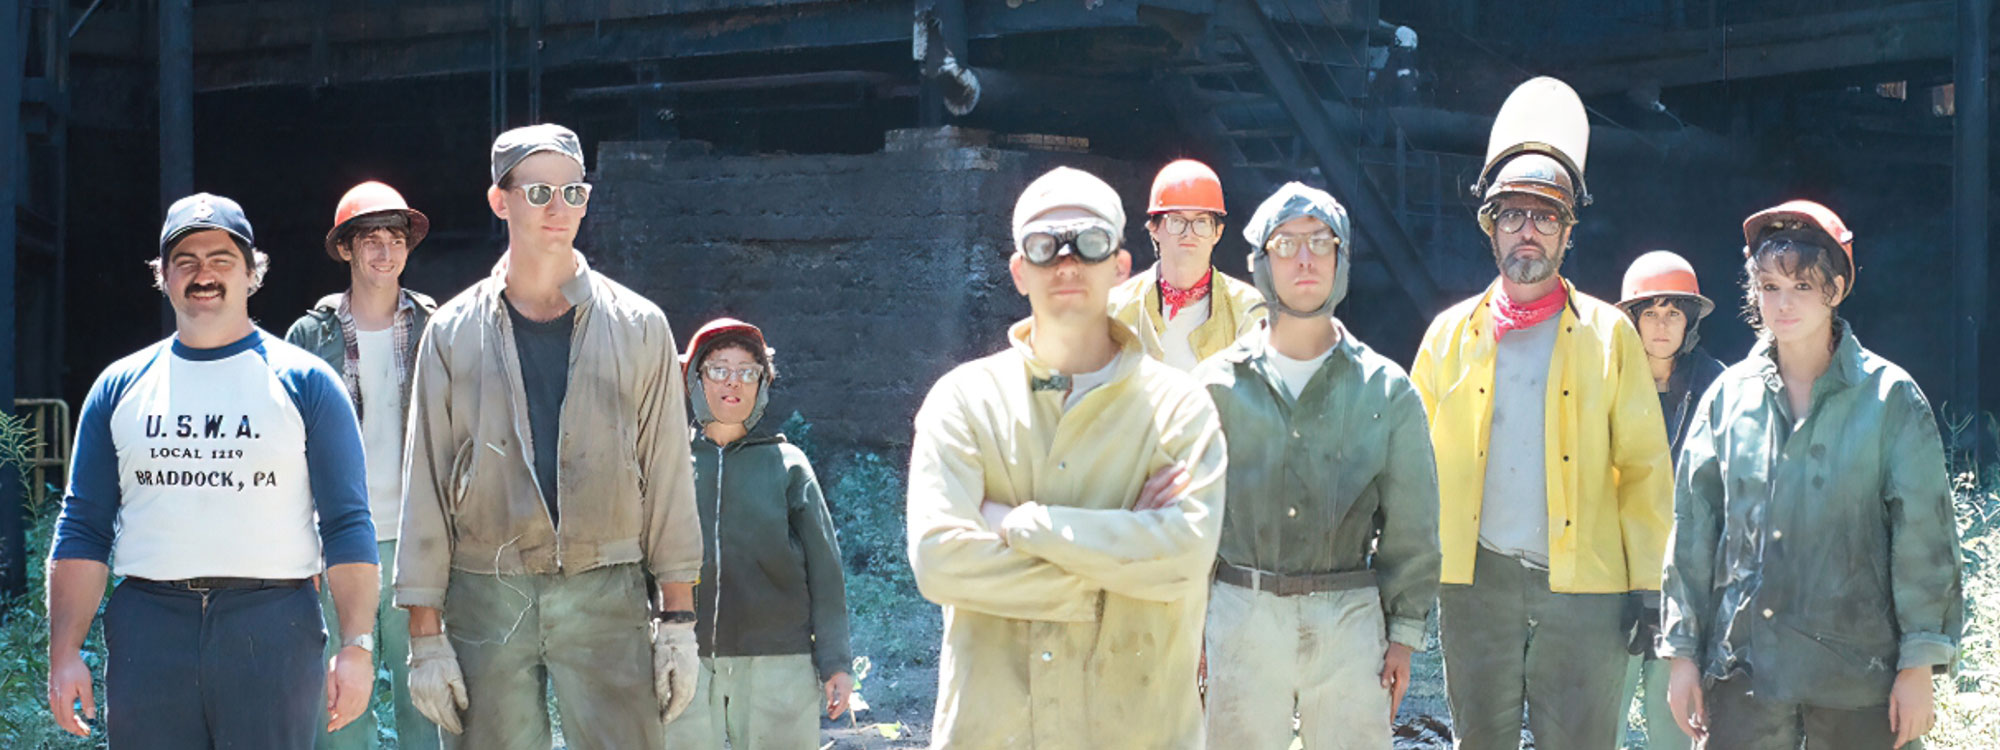 A group of Steelworkers posing with a steelmill in the background